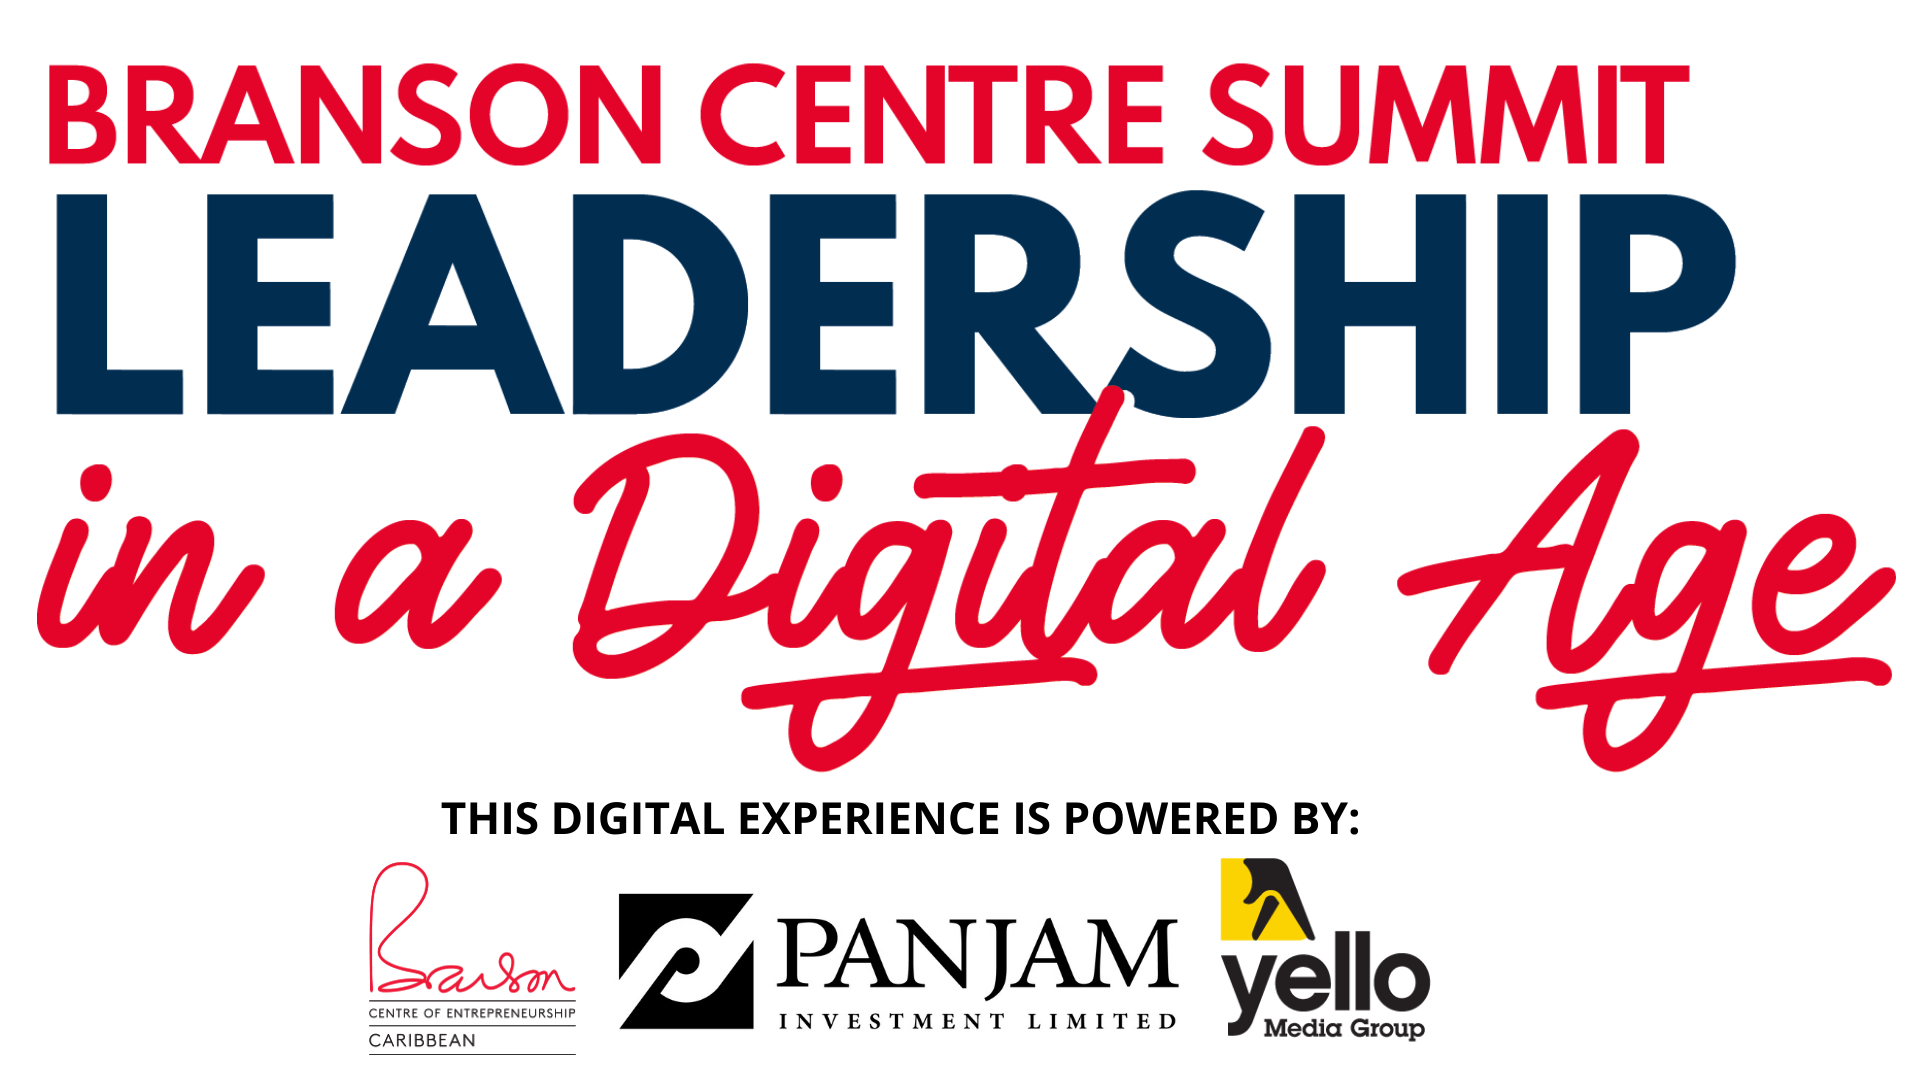 LEADERSHIP IN A DIGITAL AGE #BRANSONCENTRE SUMMIT